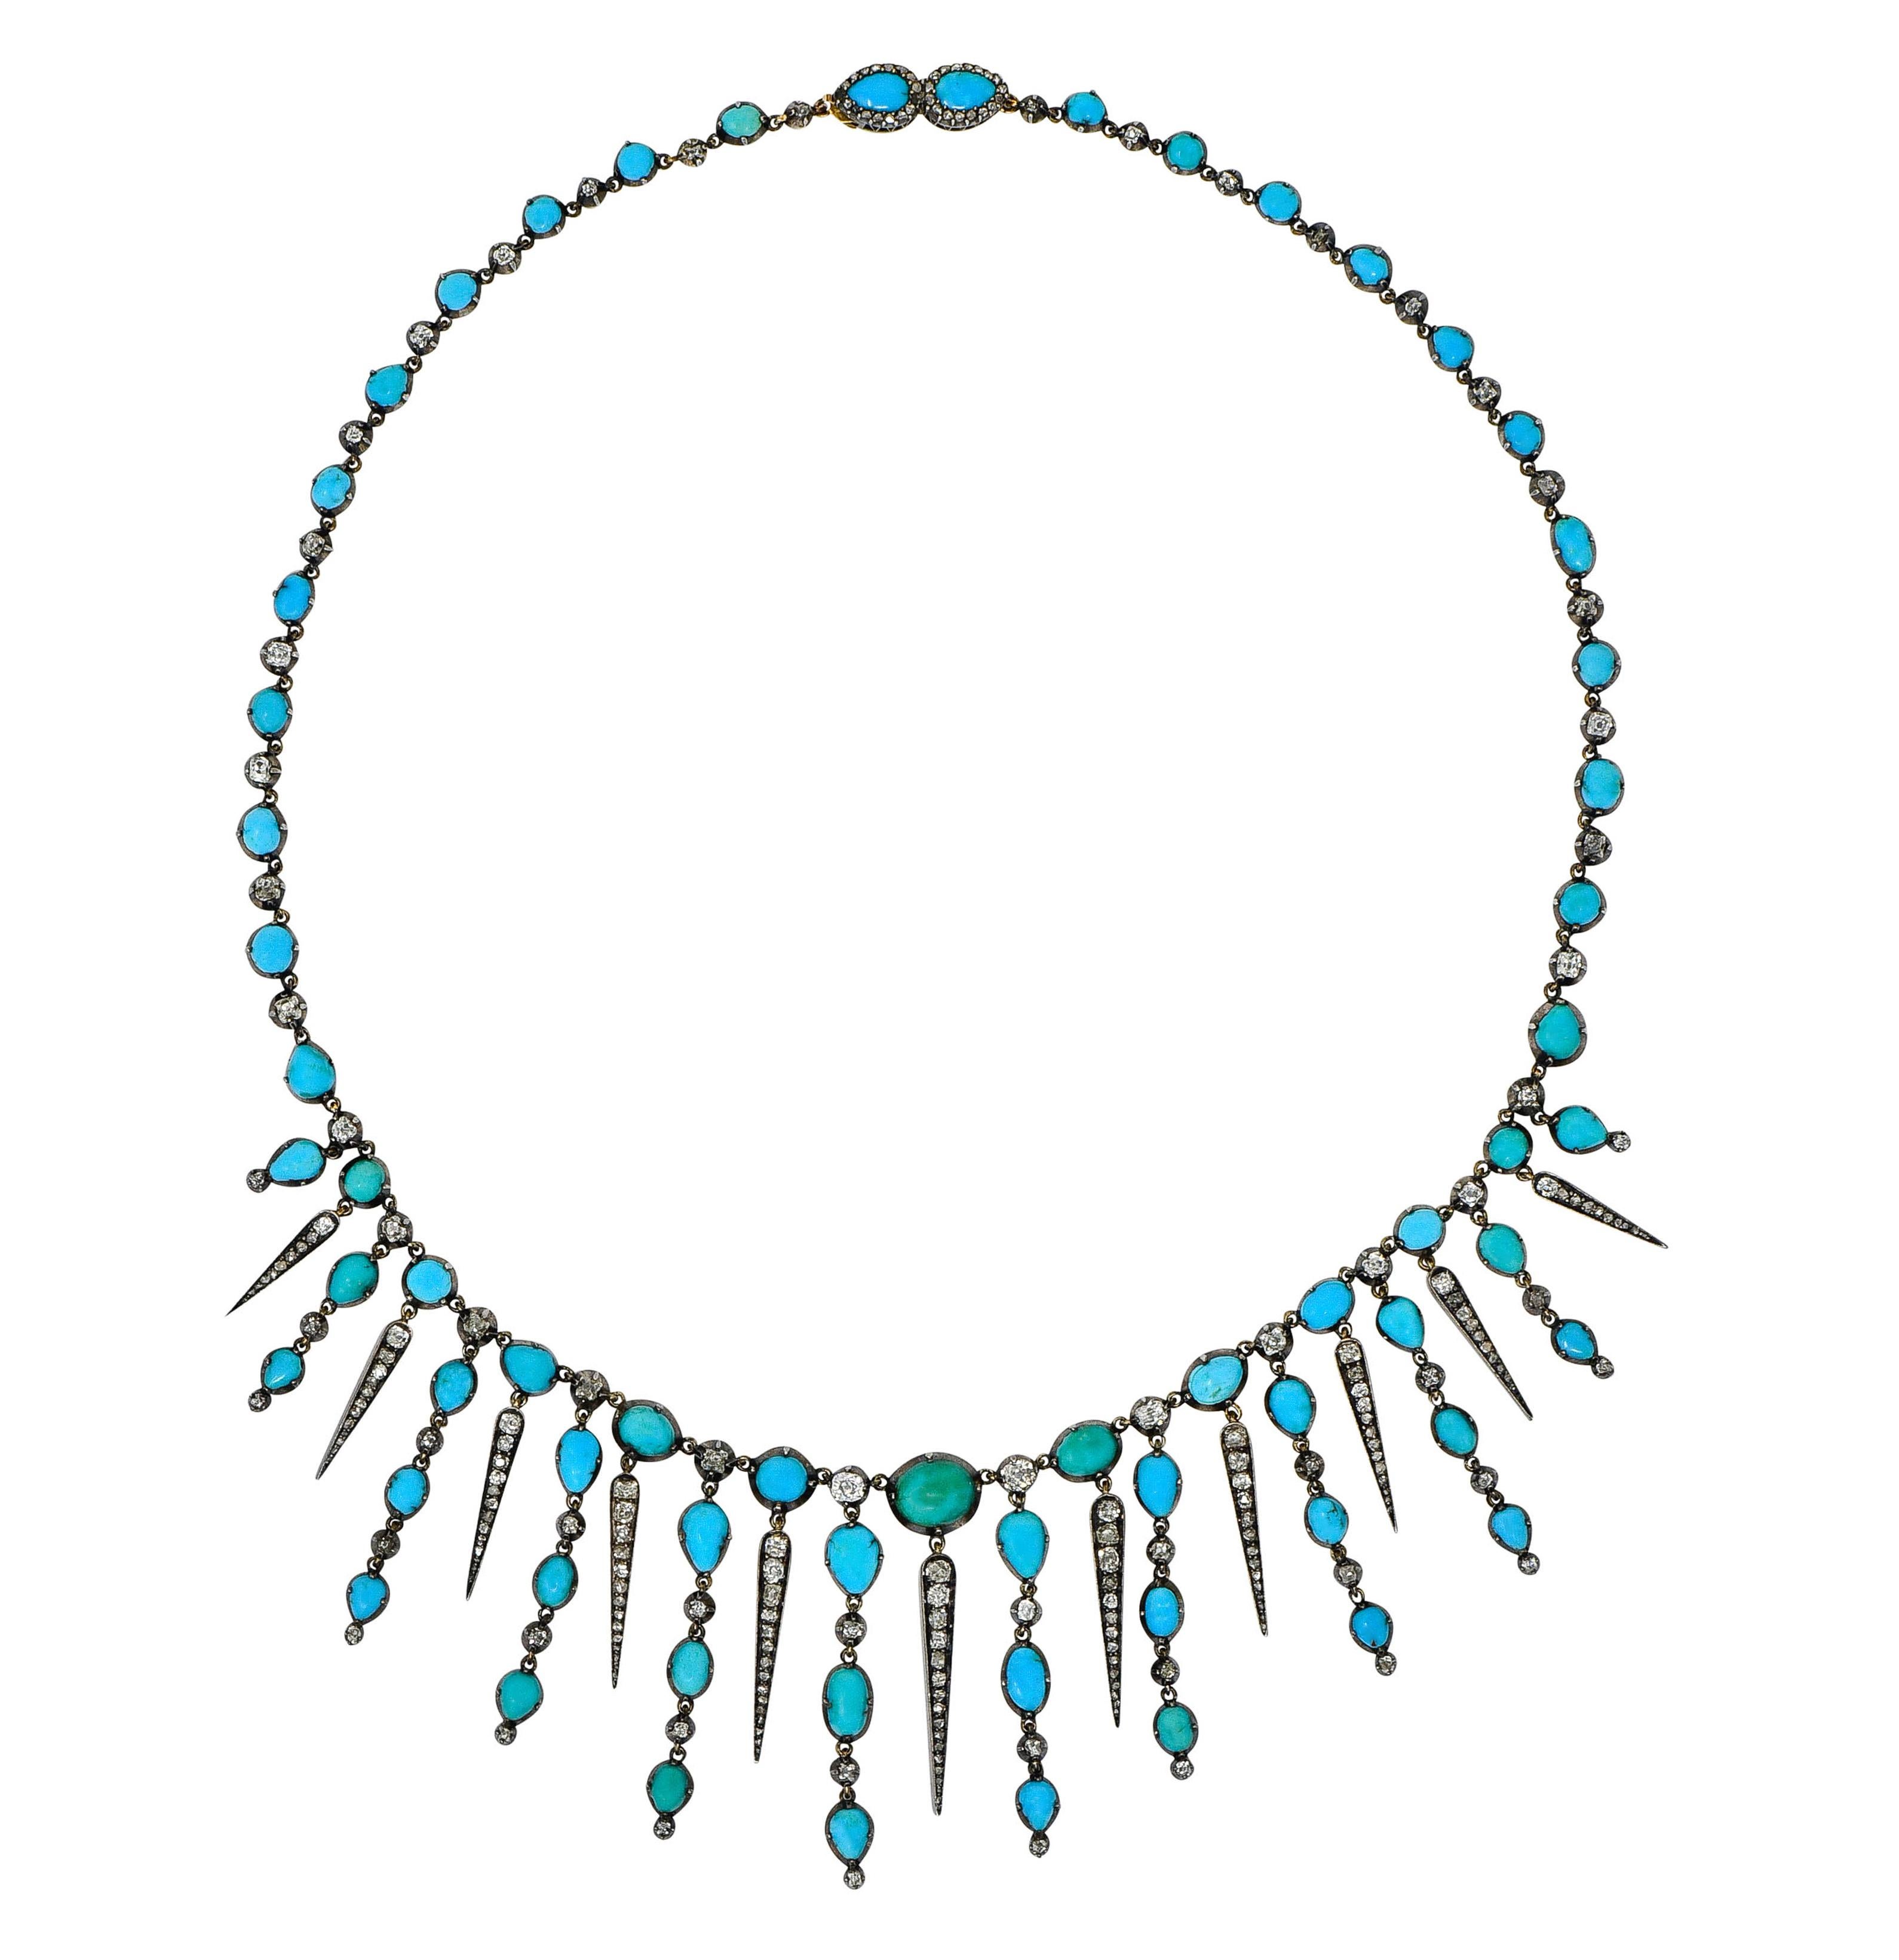 Collar style necklace is comprised of turquoise cabochon and diamond links

Centering articulated droplets of graduated turquoise cabochon alternating with pointed diamond drops

Turquoise is opaque with bluish-green to sky blue color and some